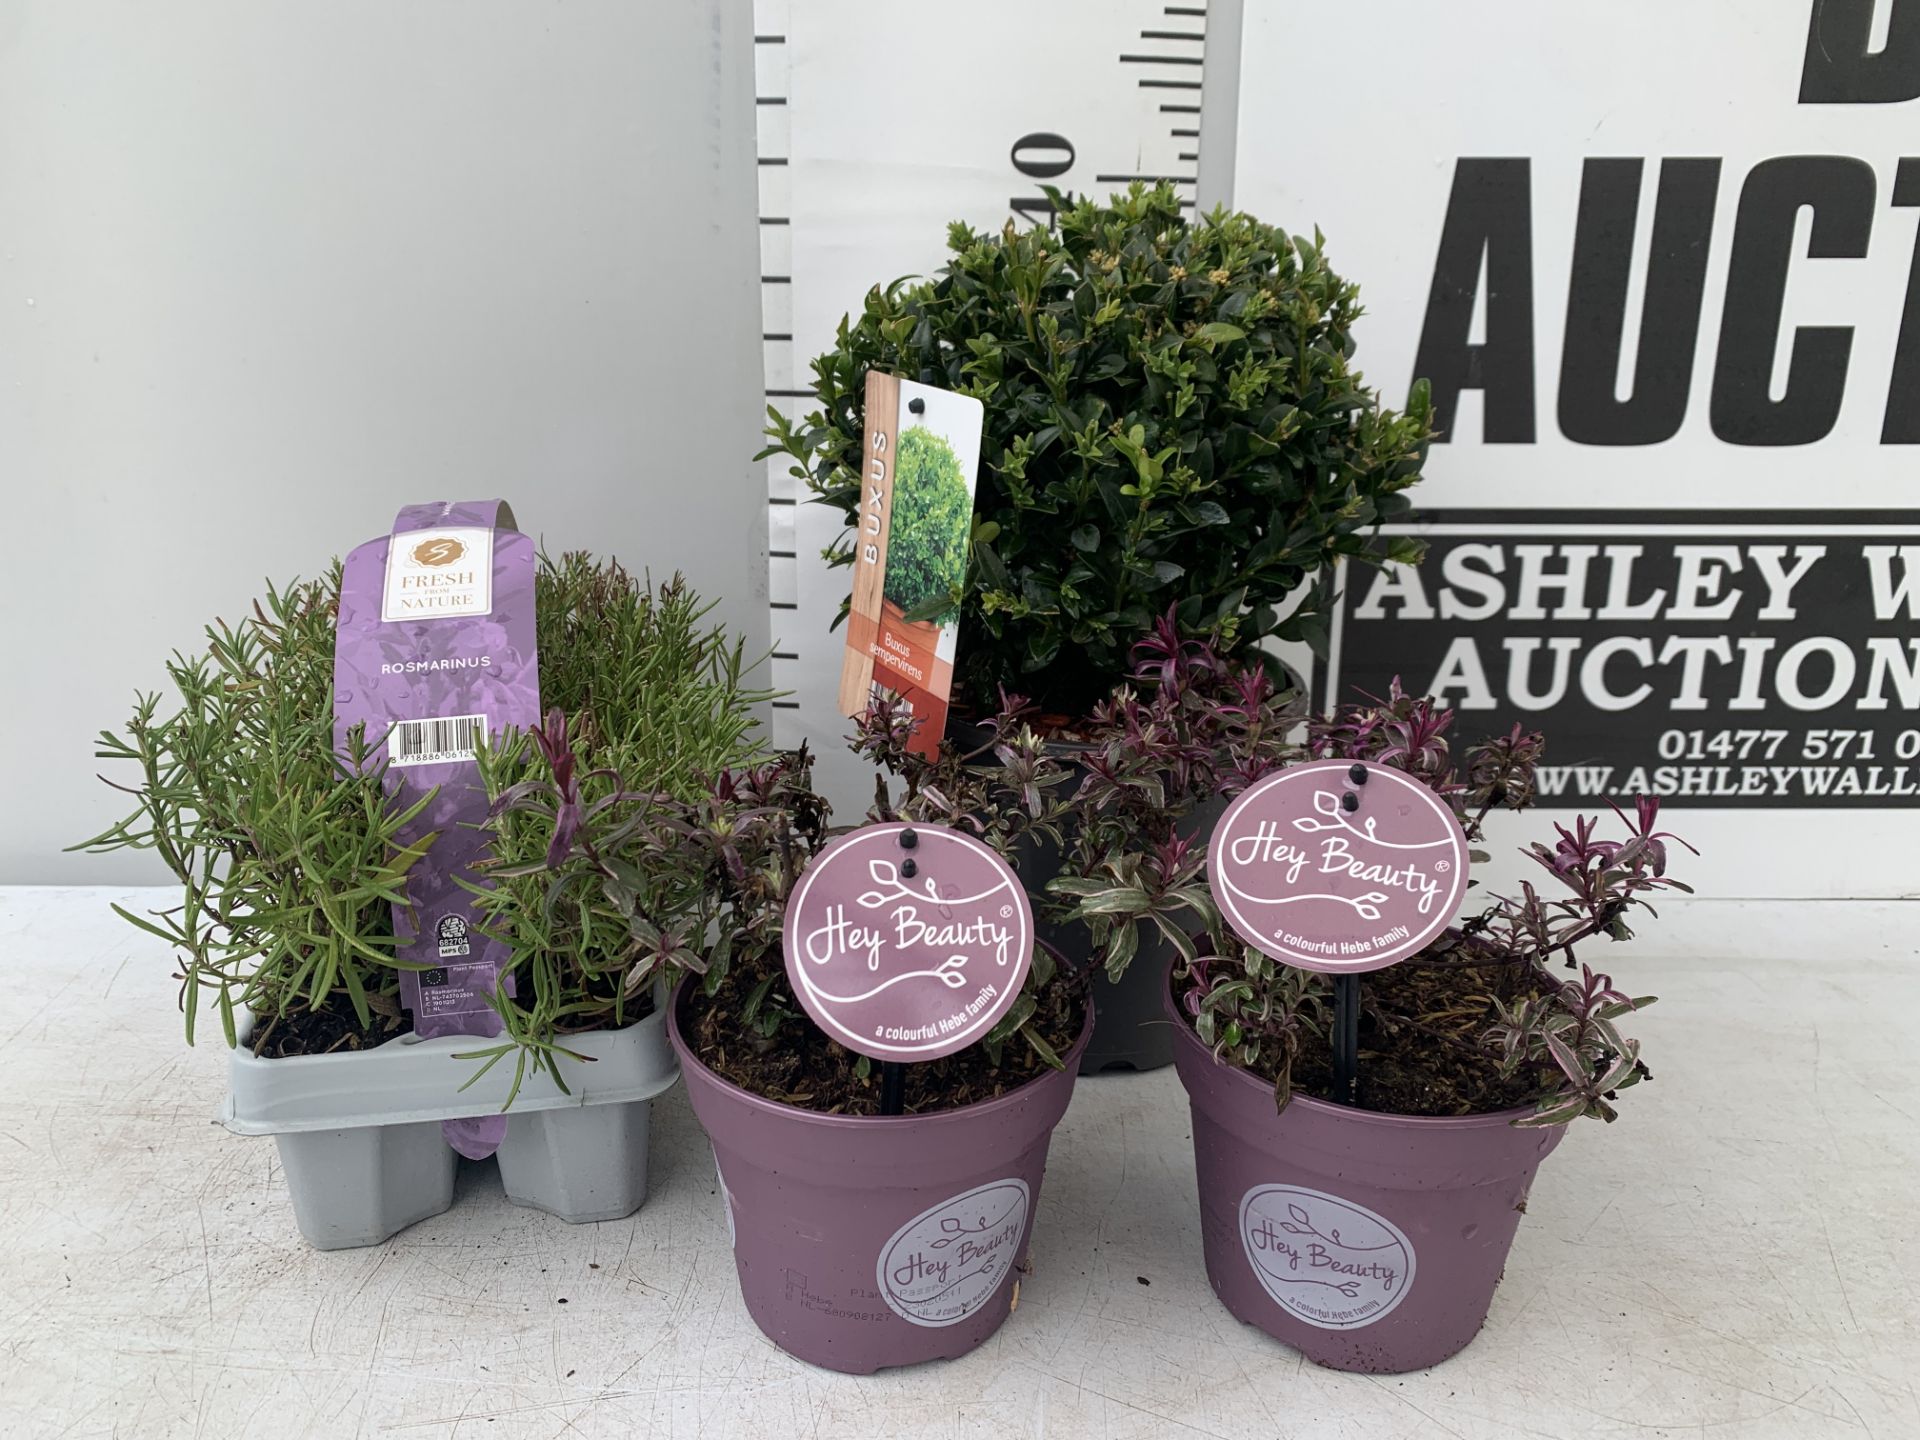 MIXED LOT OF PLANTS - ONE BUXUS SEMPERVIRENS IN A 2 LTR POT, SIX ROSEMARY PLUG PLANTS IN A CARRY